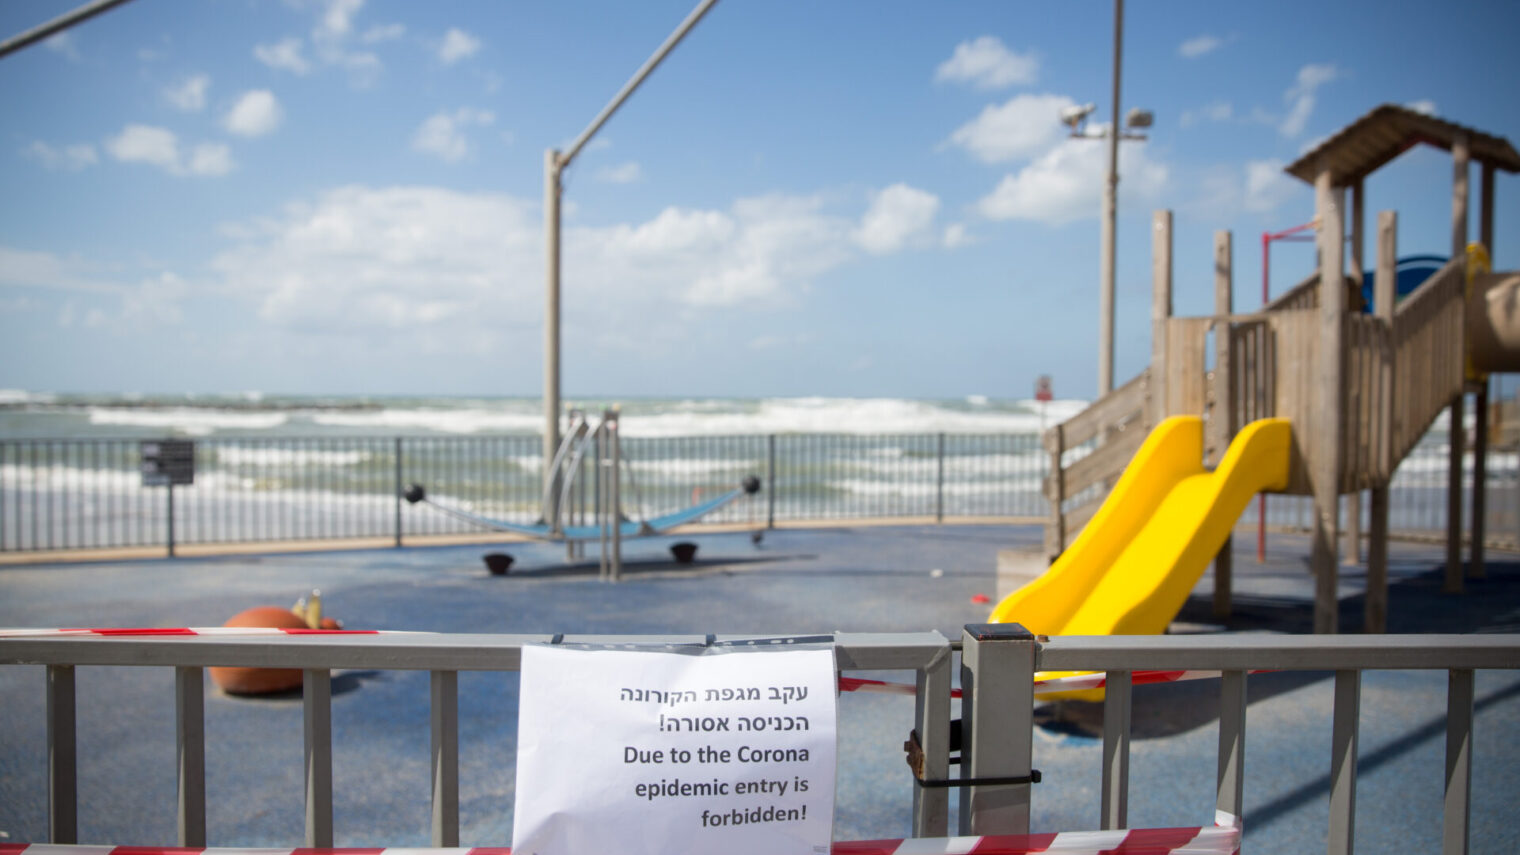 A closed playground at Tel Aviv Port. Photo by